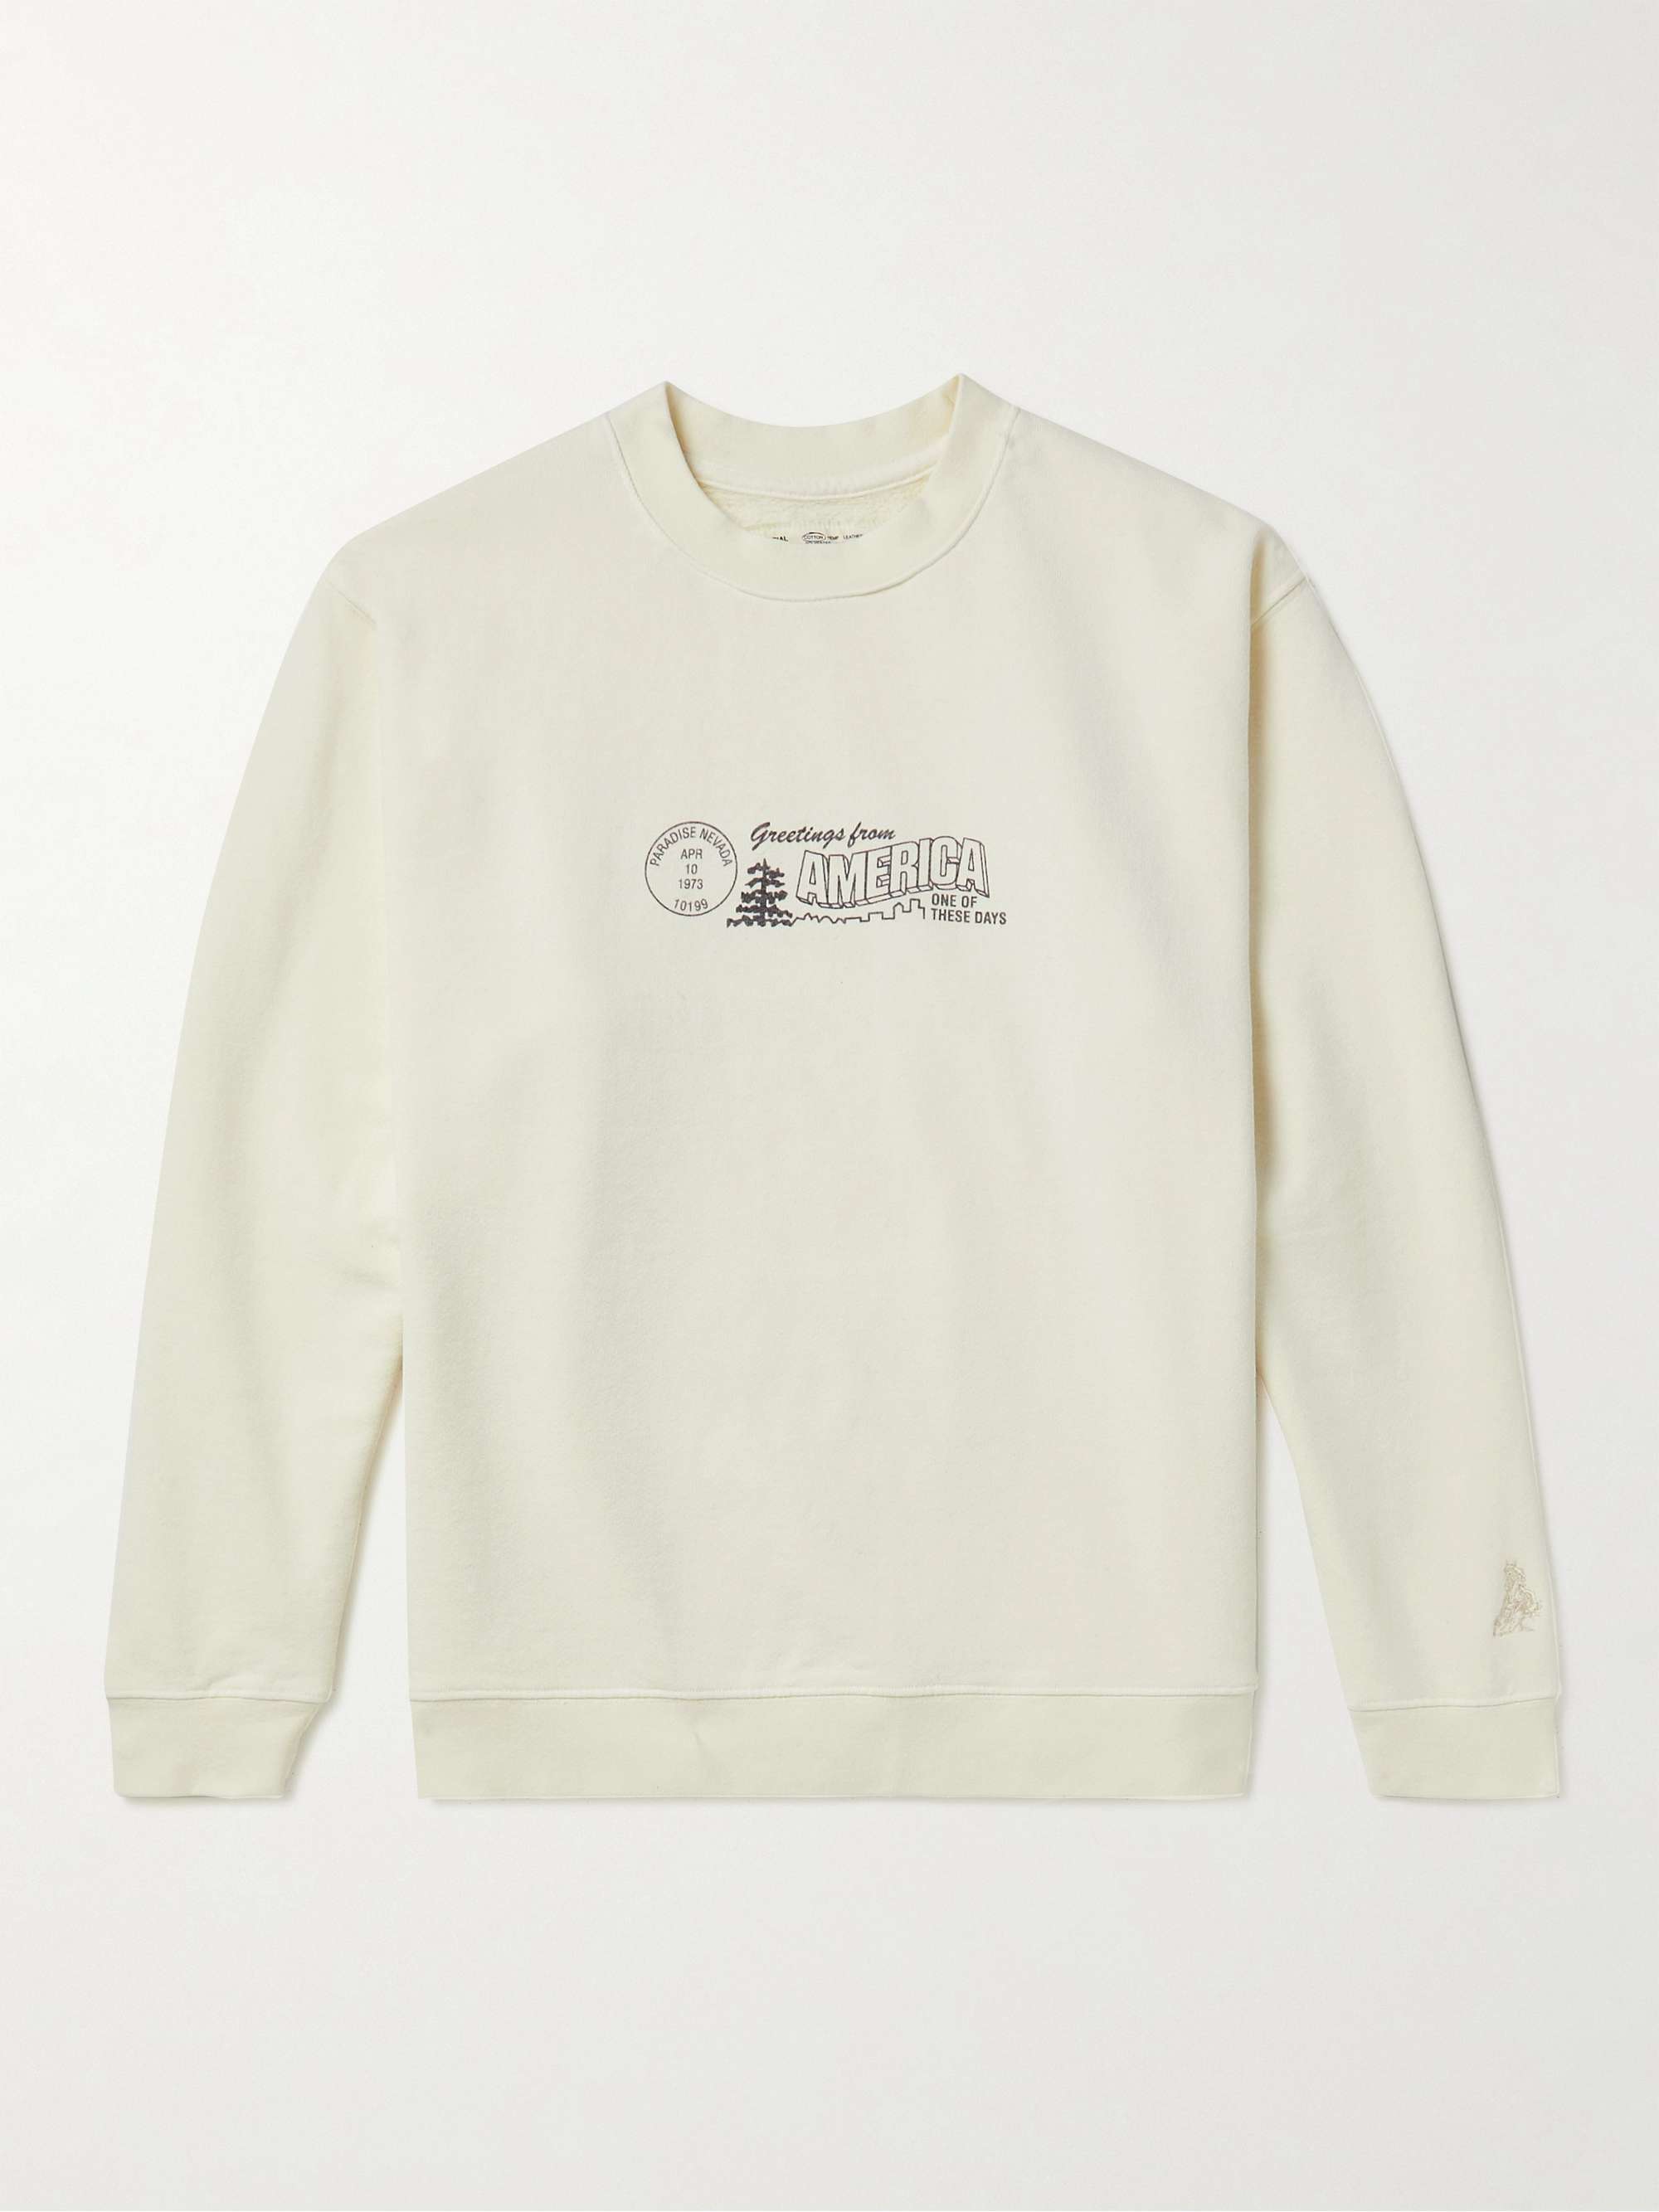 ONE OF THESE DAYS Printed Cotton-Jersey Sweatshirt | MR PORTER